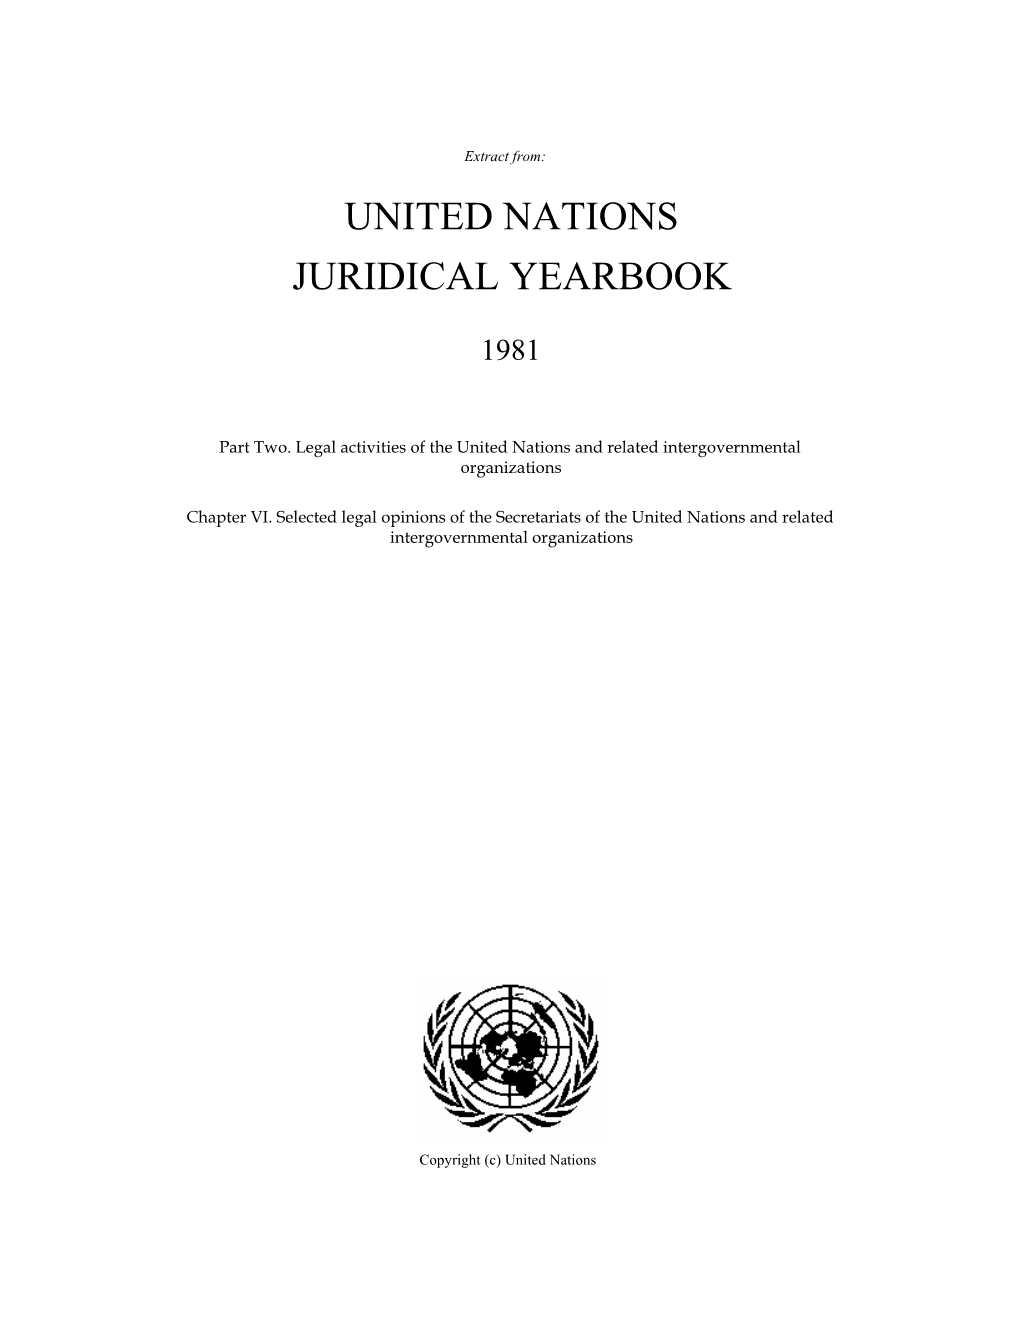 United Nations Juridical Yearbook, 1981